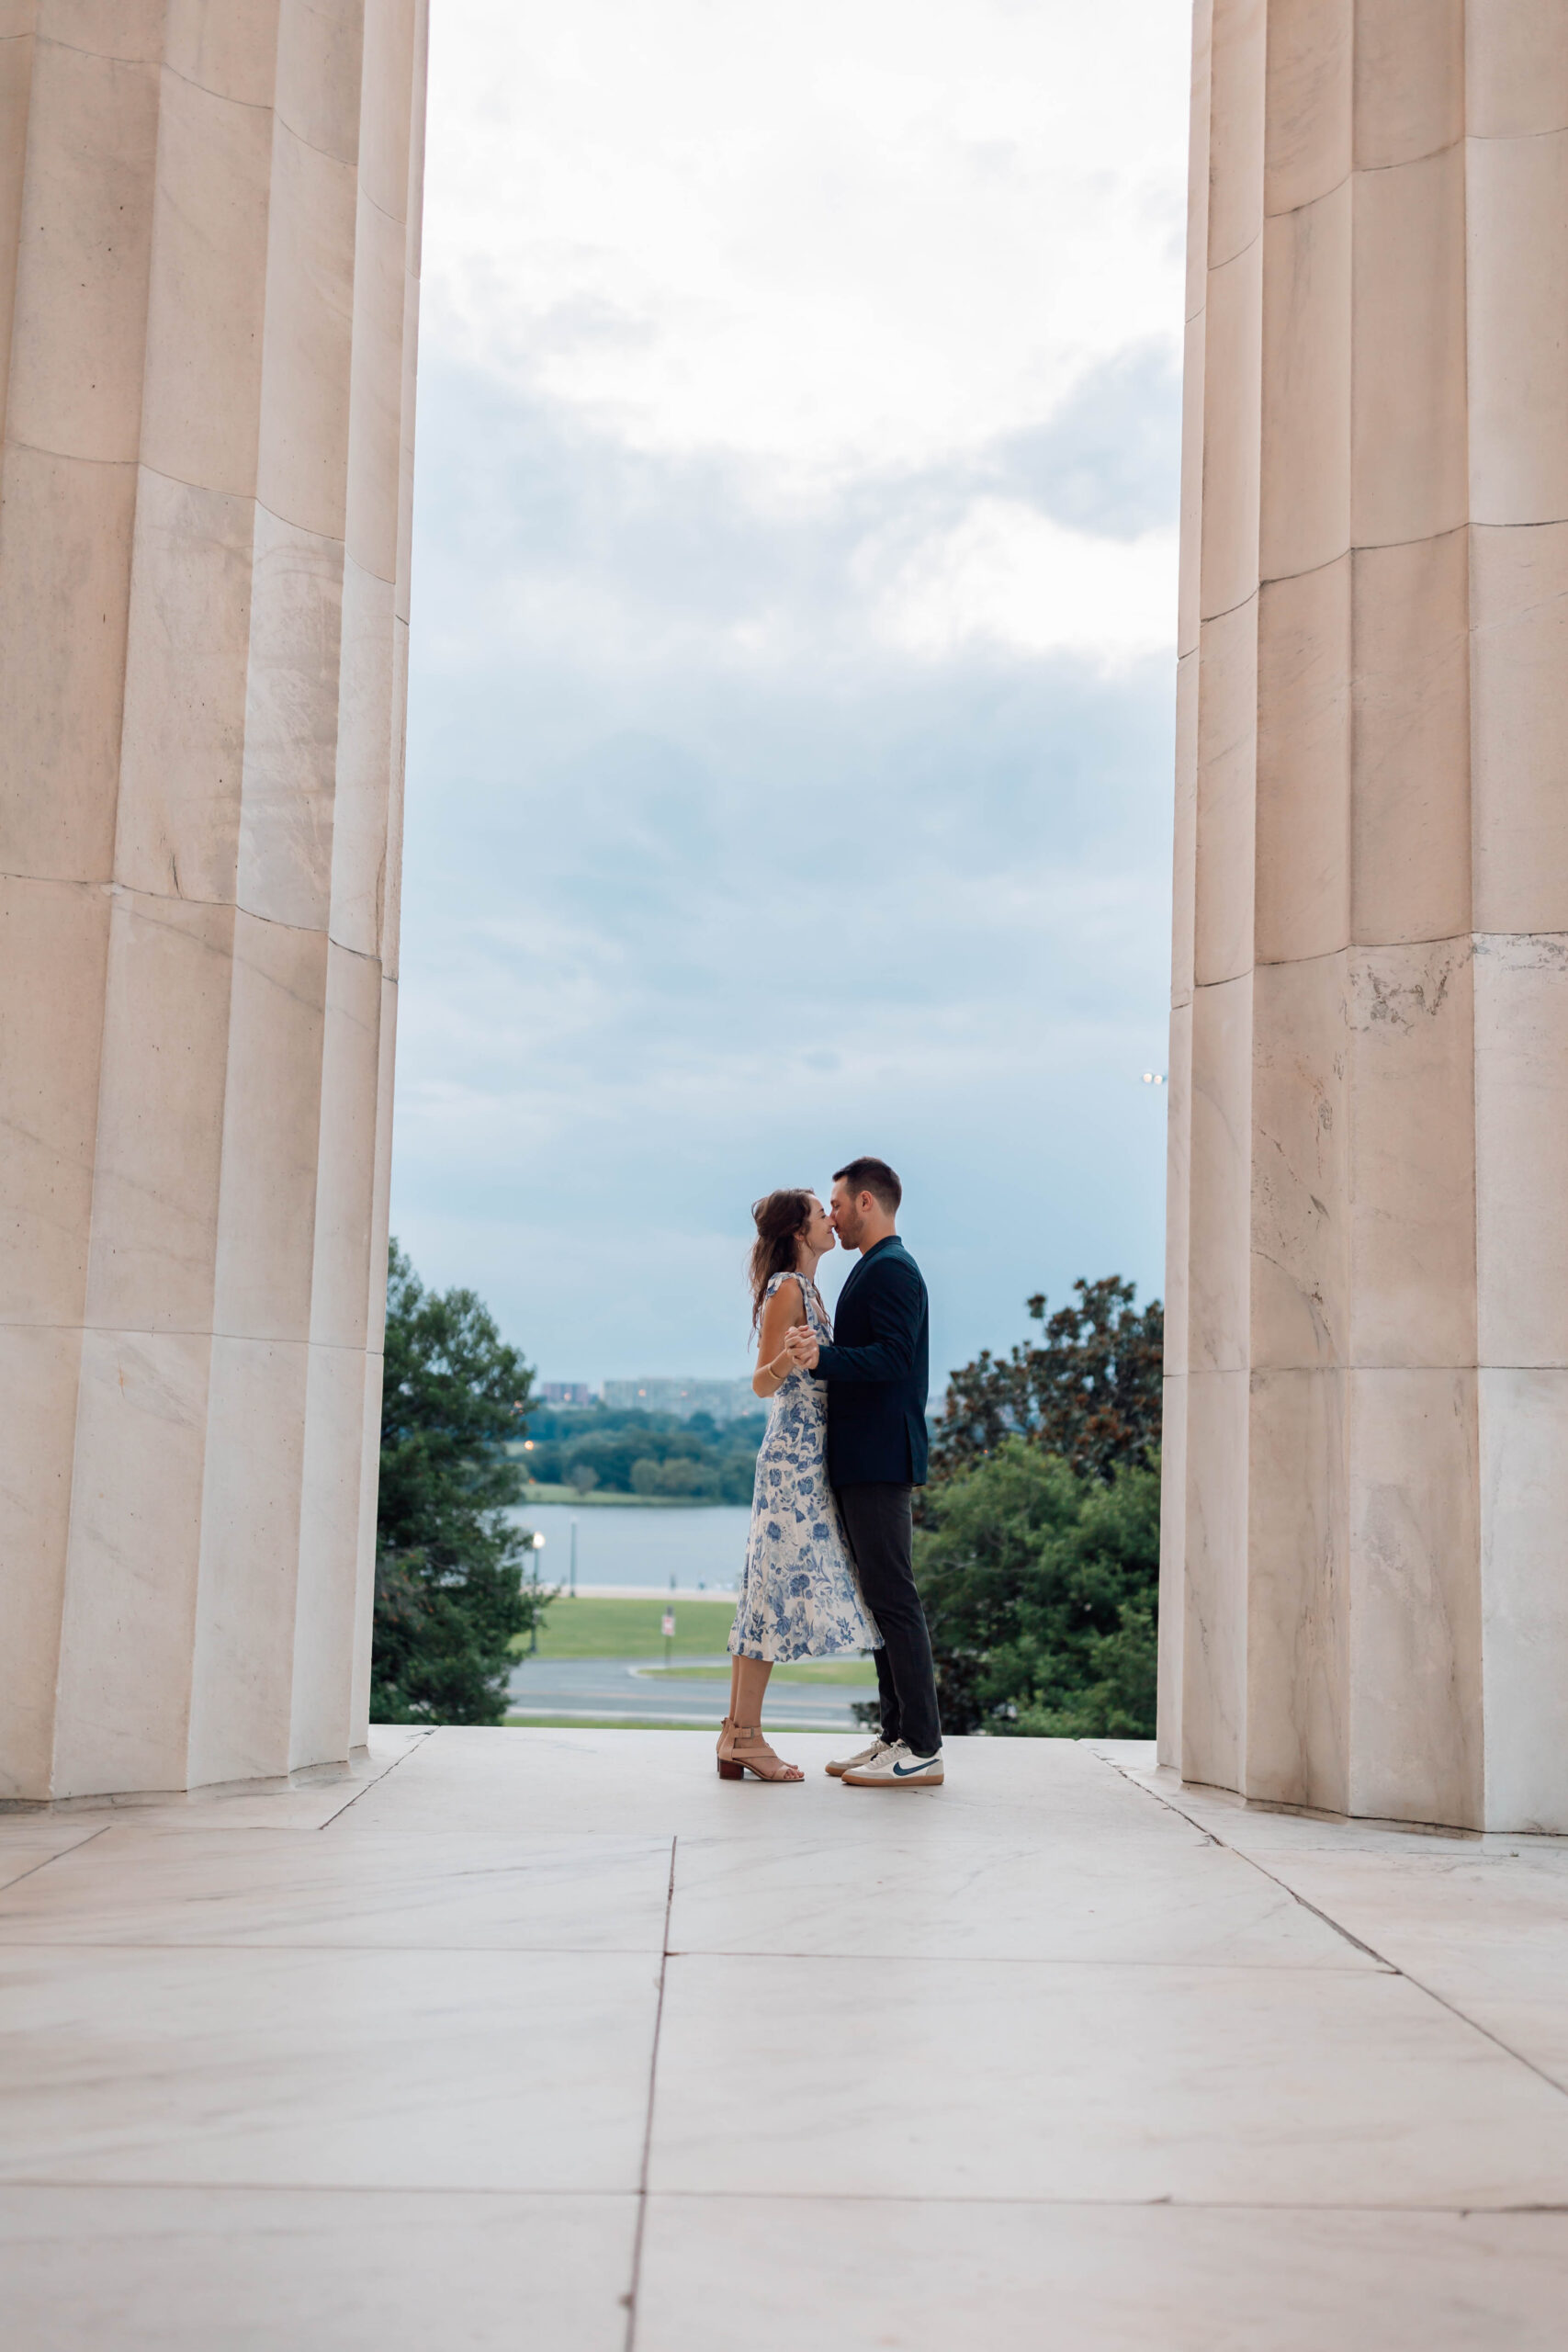 Romantic Washington D.C. Engagement Photo Session at The Lincoln Memorial. True to color, cinematic photography